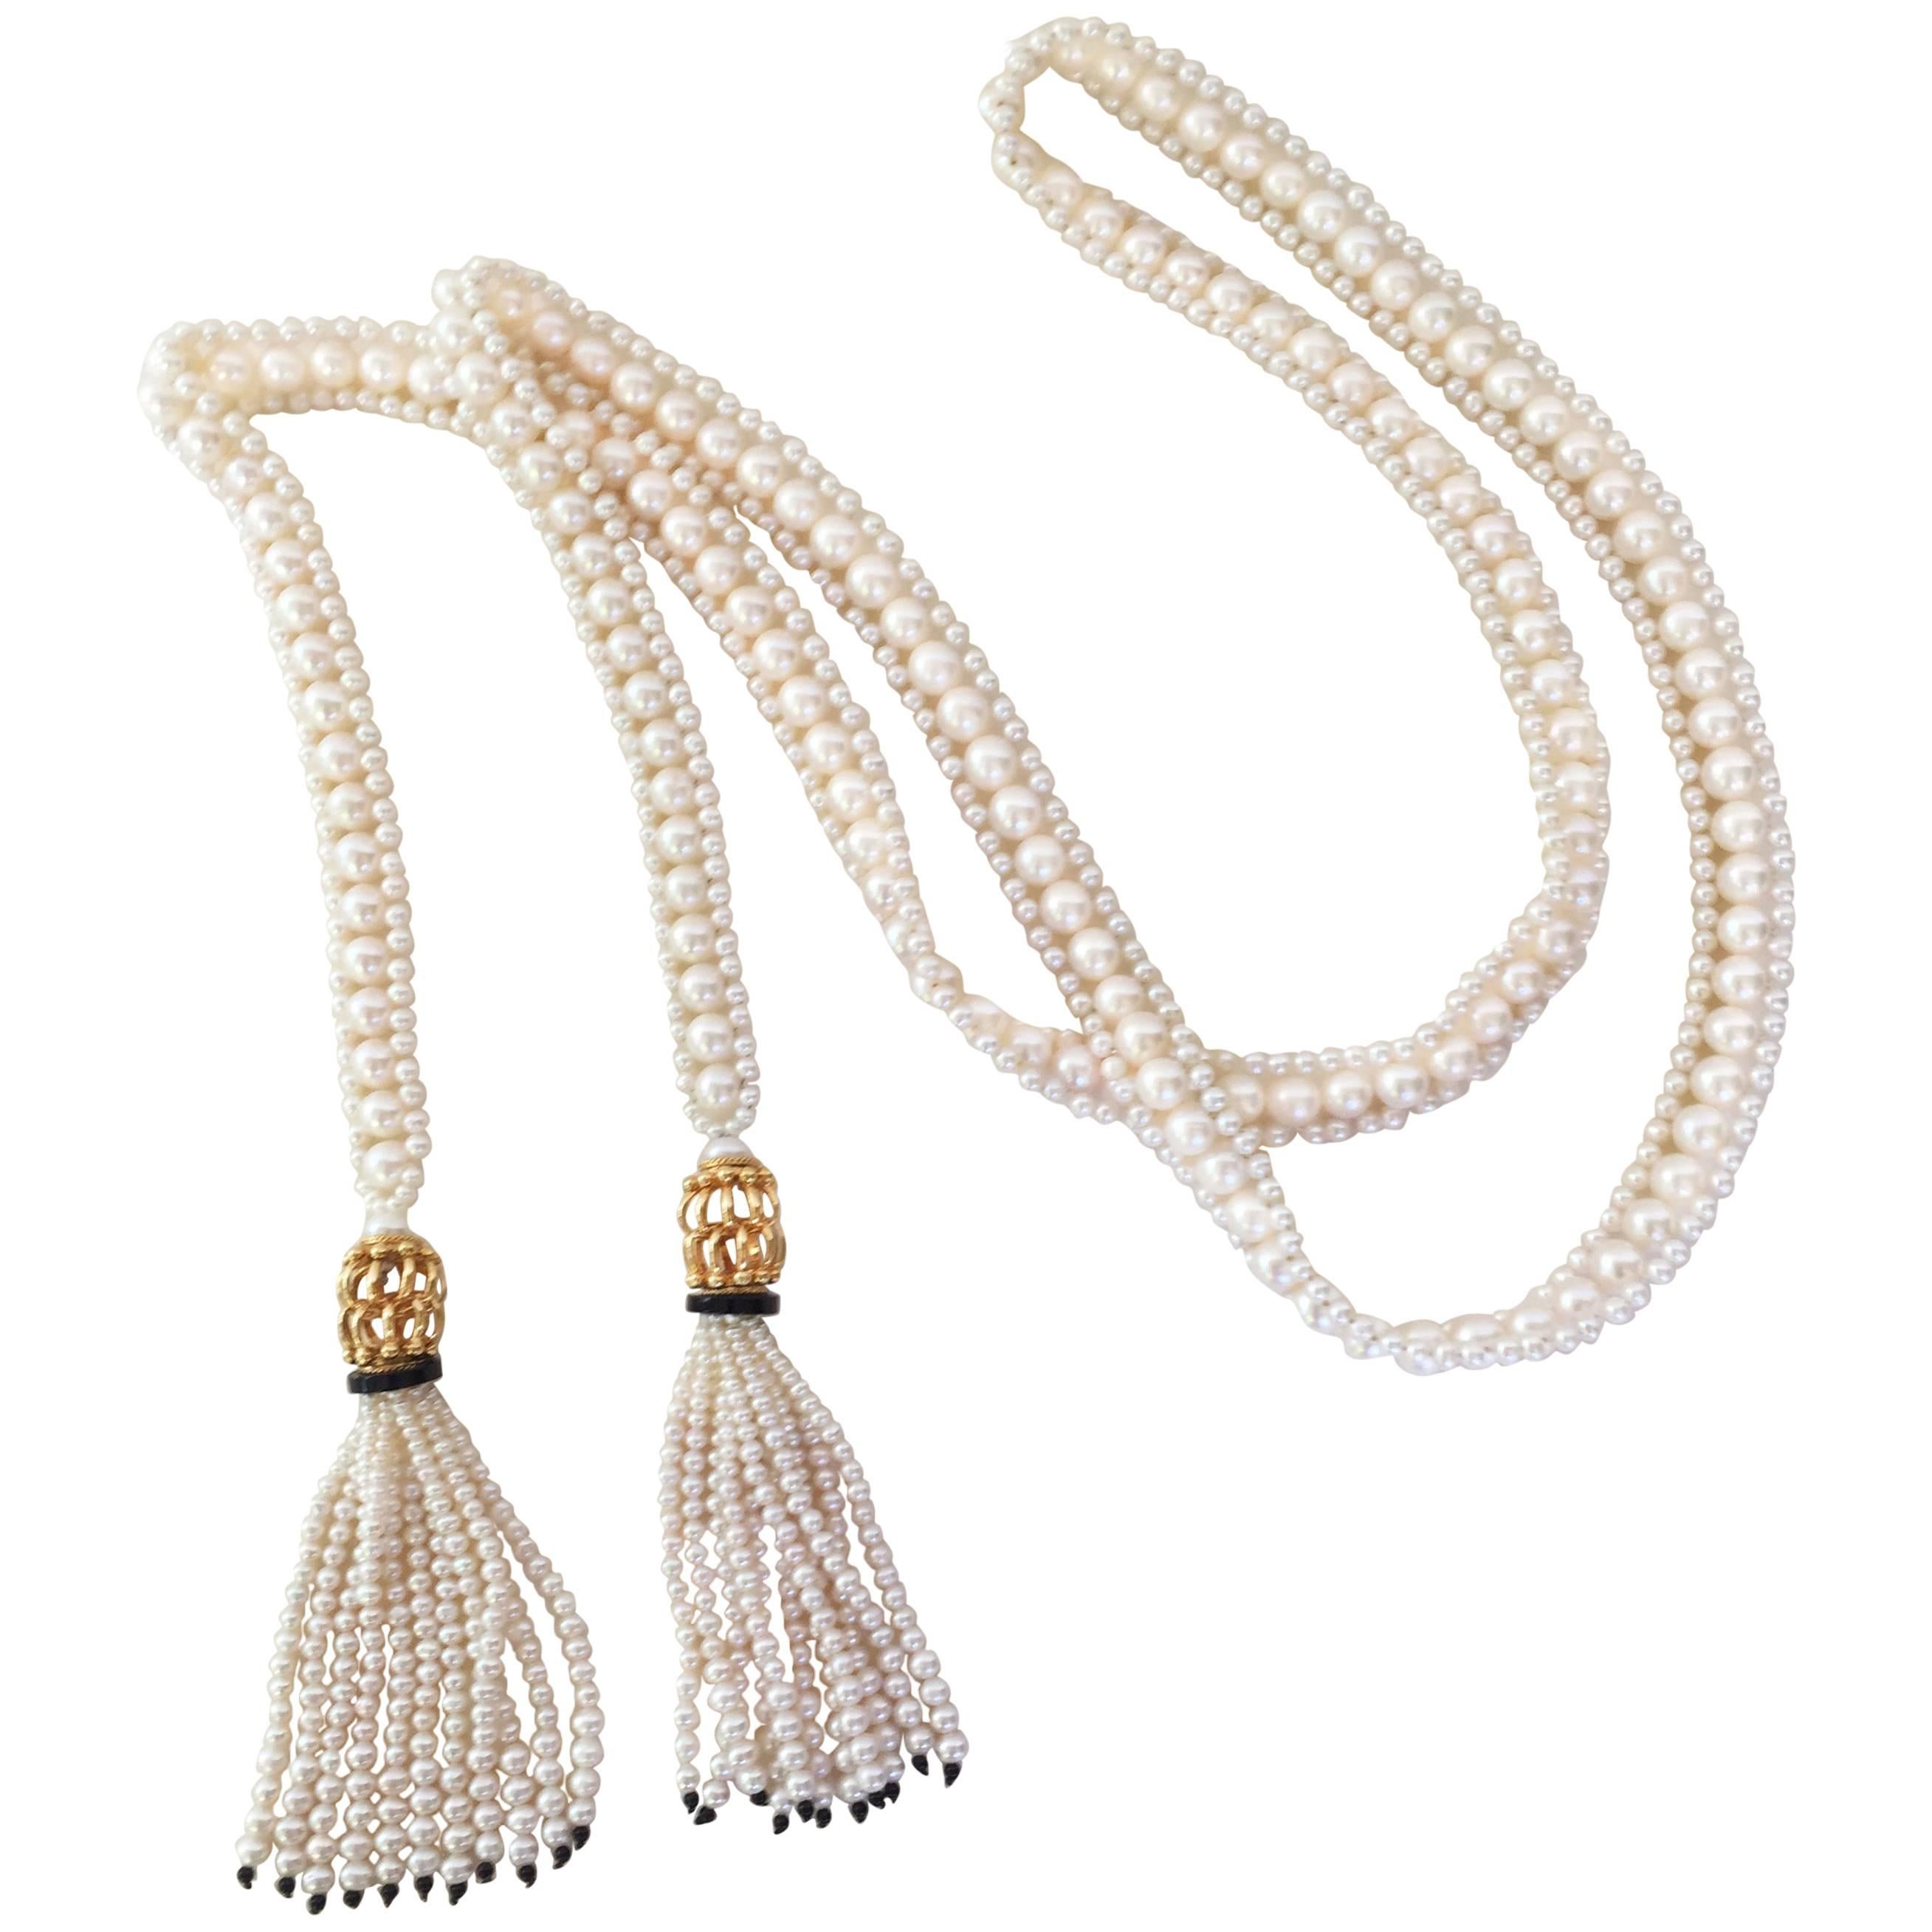 White Woven Pearl Sautoir with Pearl Tassels and Onyx Detailing by Marina J